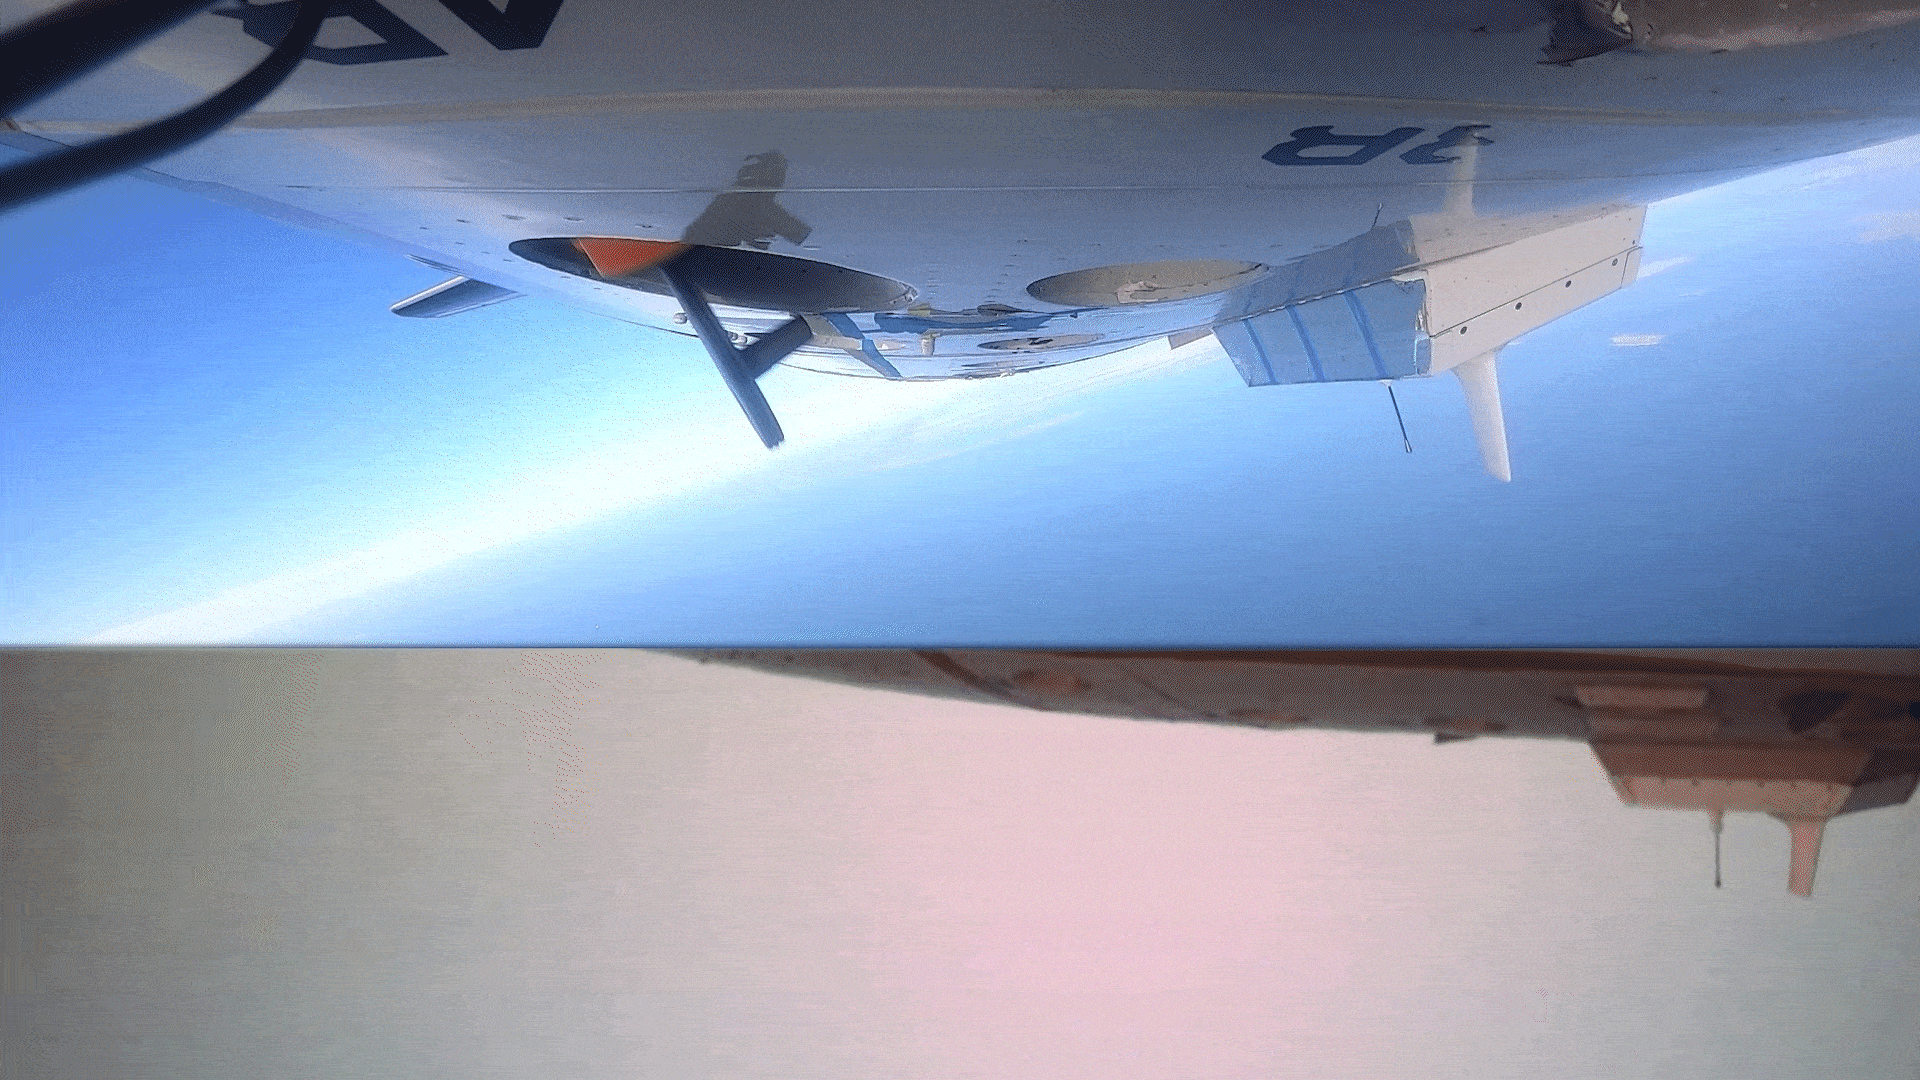 Animated gif that shows an Altius unmanned aircraft being released from the bottom of a p-3 aircraft. It is an orange cylinder with a black nose, released back first, as it exits the aircraft it rotates and two rear vanes extend before it leaves the bottom of the frame. The gif is split into top and bottom panes with the top portraying a front view, and the rear depicting a starboard view of the probe. These uncrewed sampling vehicles allow measurements closer to the sea surface increasing the ability of researchers to measure how heat in the ocean surface sustains a storm and improves intensity forecasts